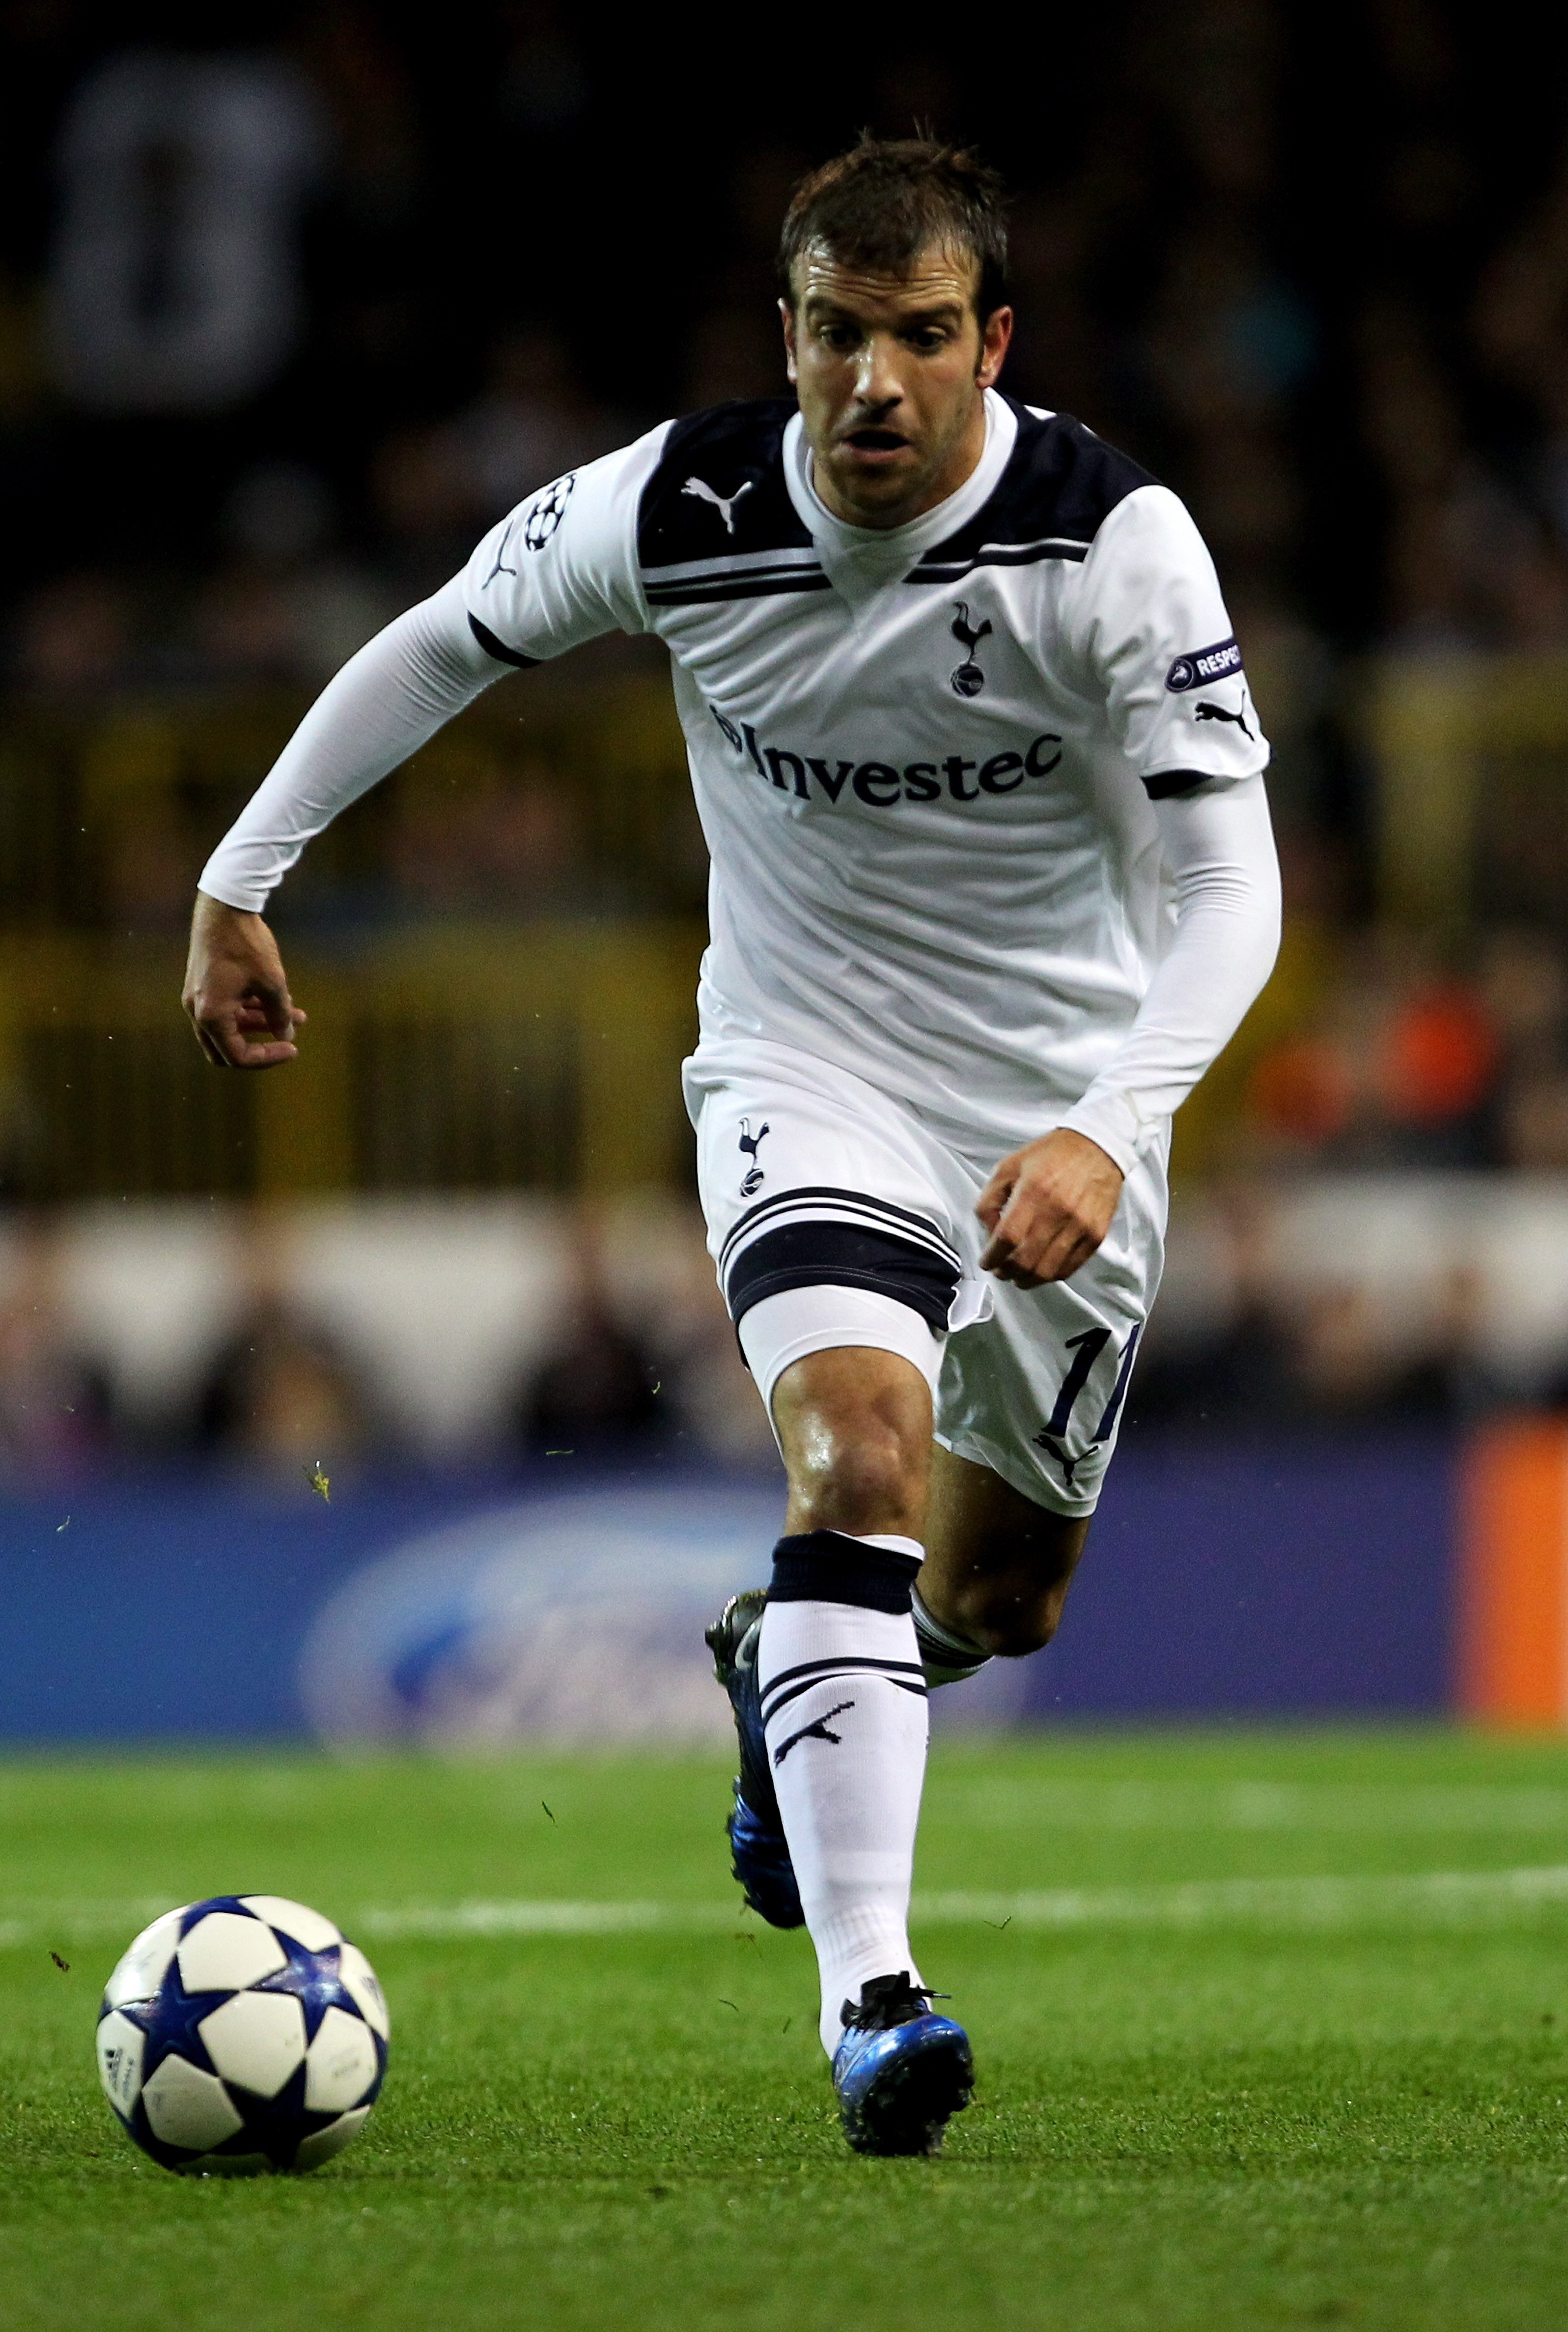 LONDON, ENGLAND - NOVEMBER 02: Rafael van der Vaart of Spurs runs with the ball during the UEFA Champions League Group A match between Tottenham Hotspur and Inter Milan at White Hart Lane on November 2, 2010 in London, England.  (Photo by Clive Rose/Getty